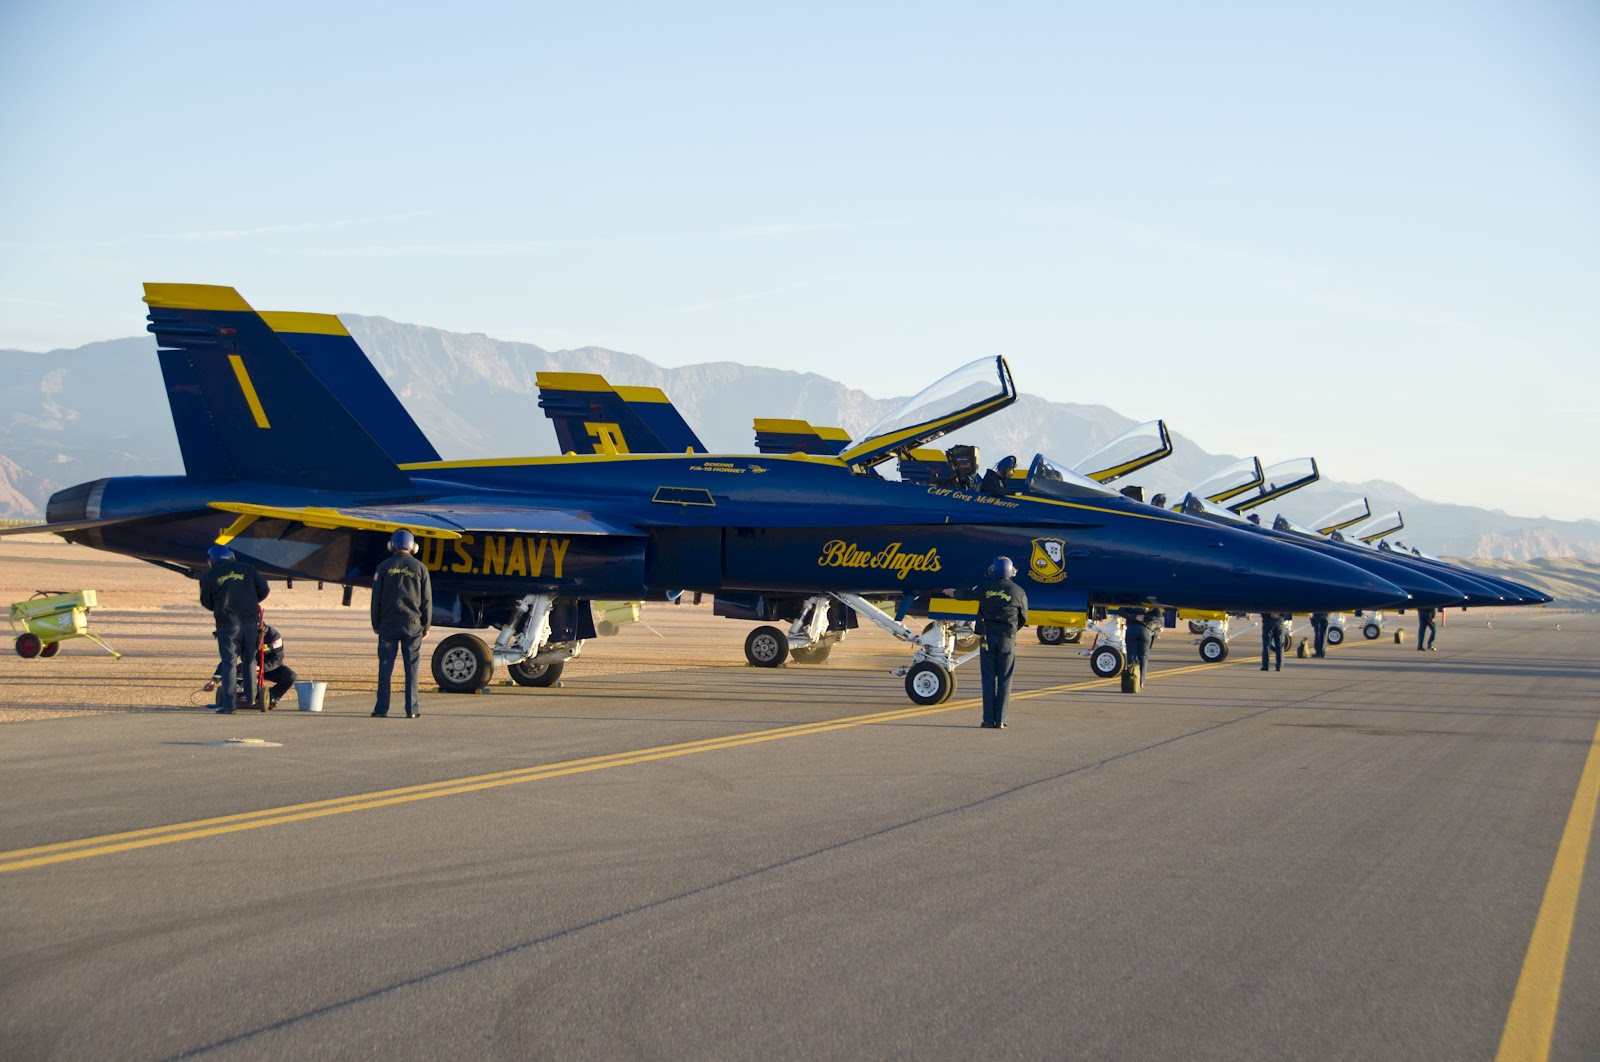 military, mcdonnell douglas f/a 18 hornet, aircraft, airplane, blue angels, navy, vehicle, jet fighters